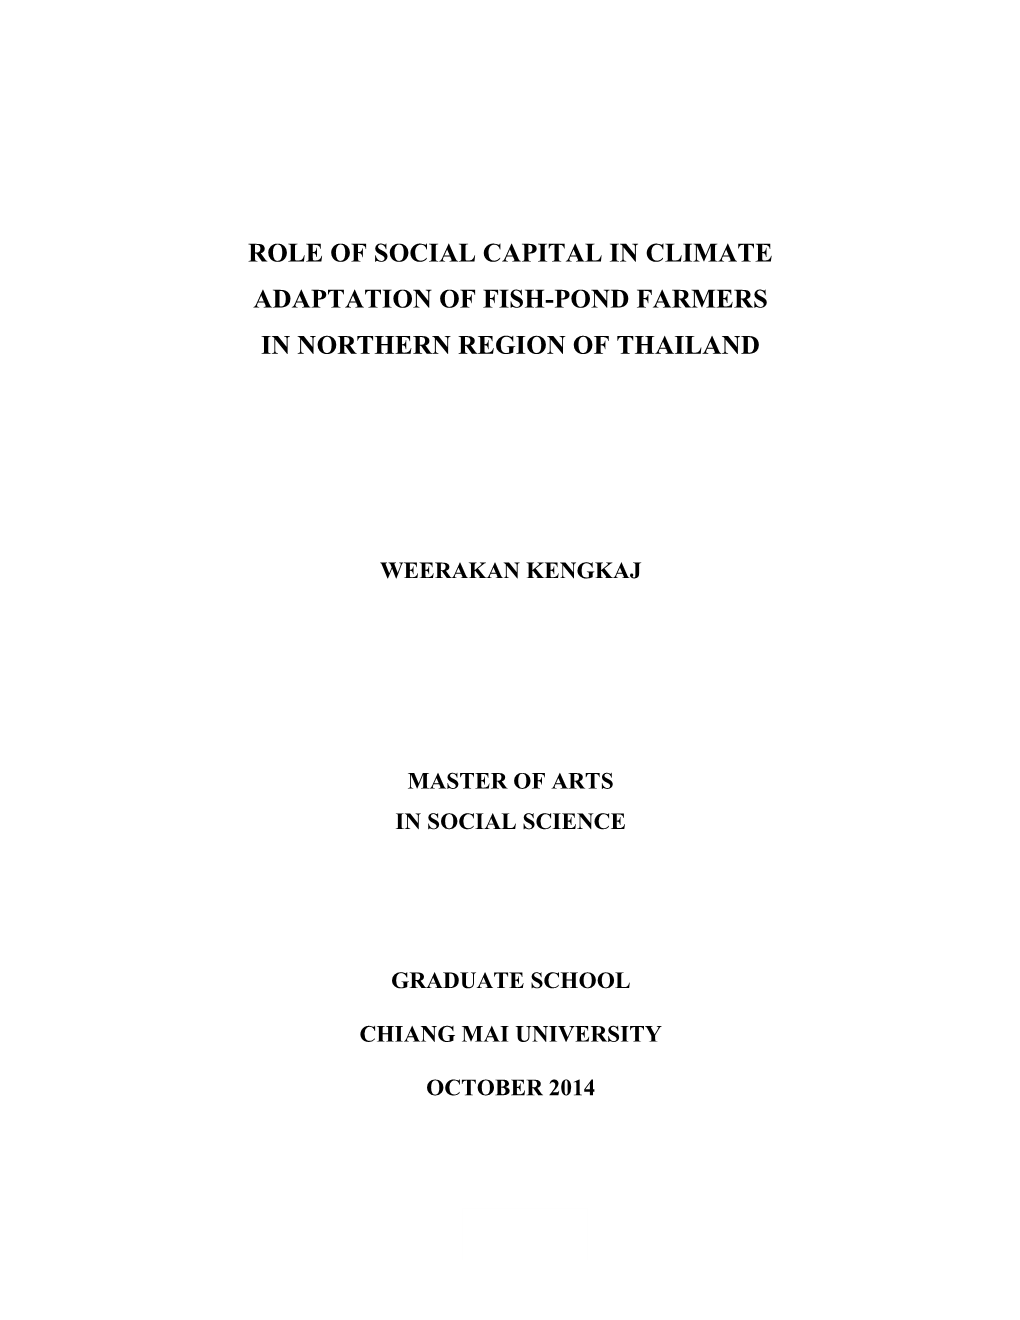 Role of Social Capital in Climate Adaptation of Fish-Pond Farmers in Northern Region of Thailand